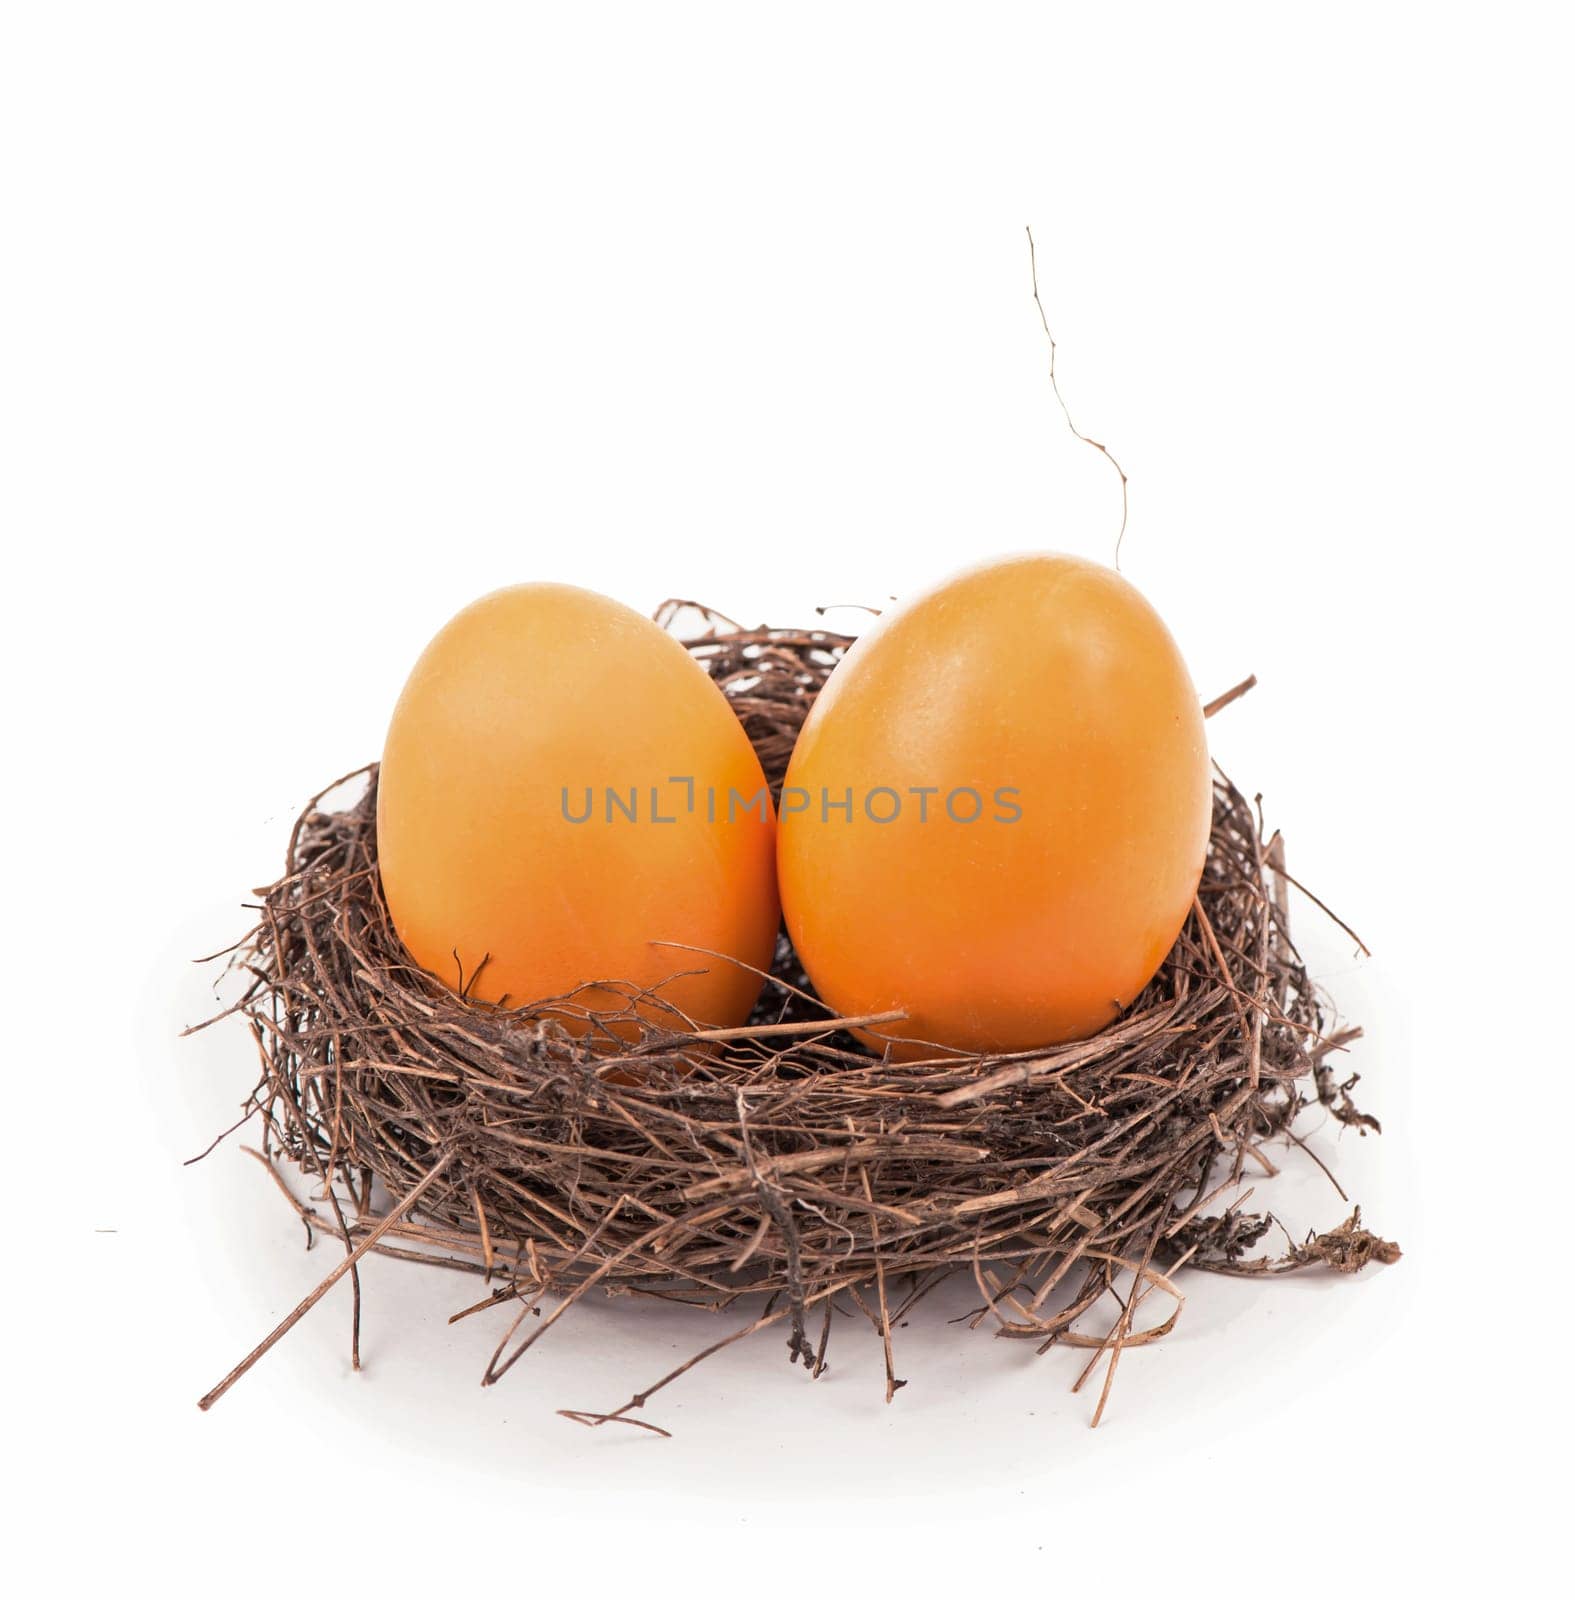 In the nest are eggs painted for Easter. Chicken eggs cooked for Easter in a wicker nest on a white background. Easter nest concept with eggs. by aprilphoto